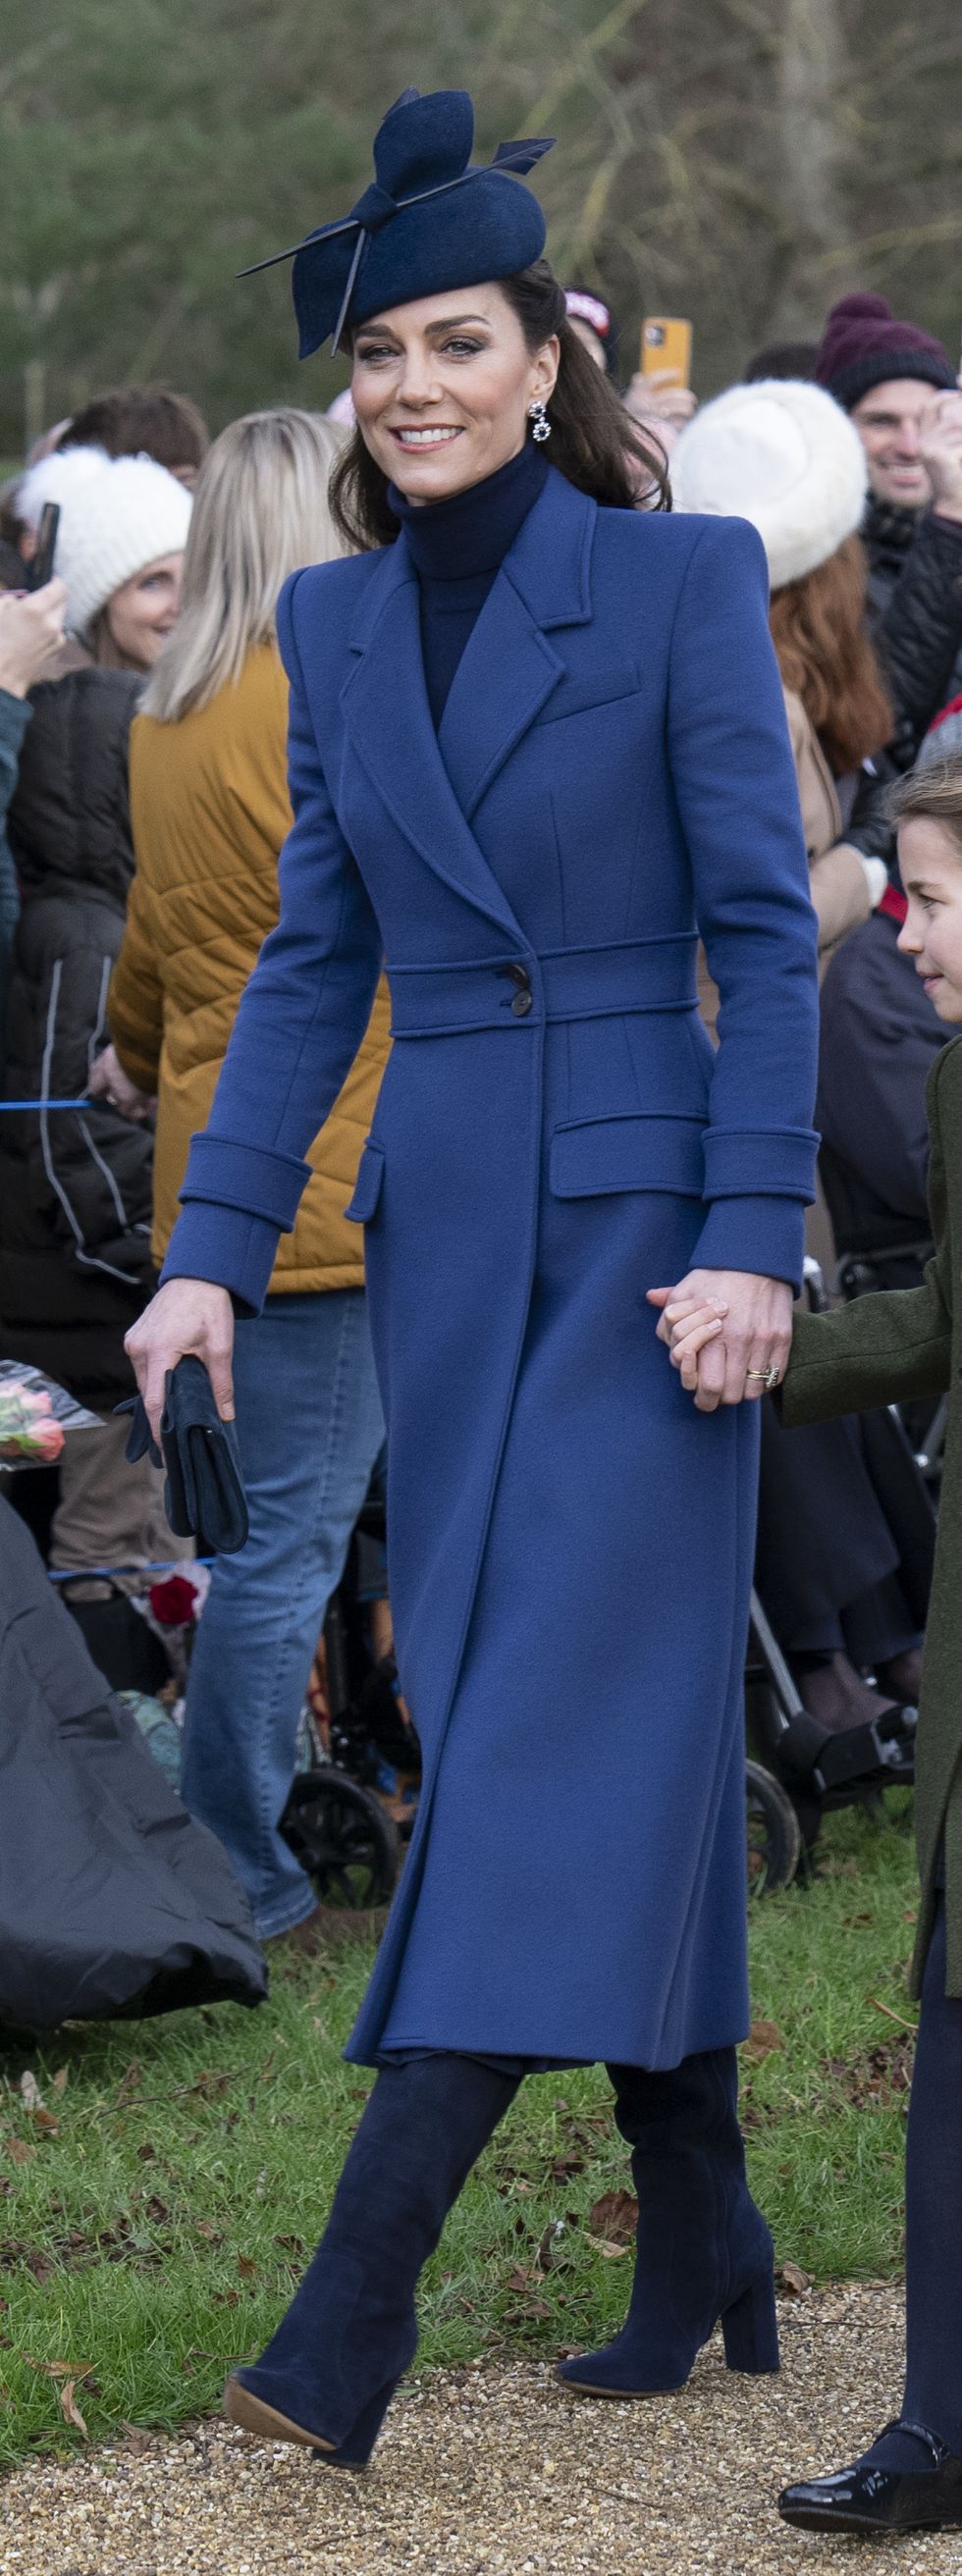 sandringham, norfolk december 25 catherine, princess of wales attends the christmas day service at st mary magdalene church on december 25, 2023 in sandringham, norfolk photo by mark cuthbertuk press via getty images